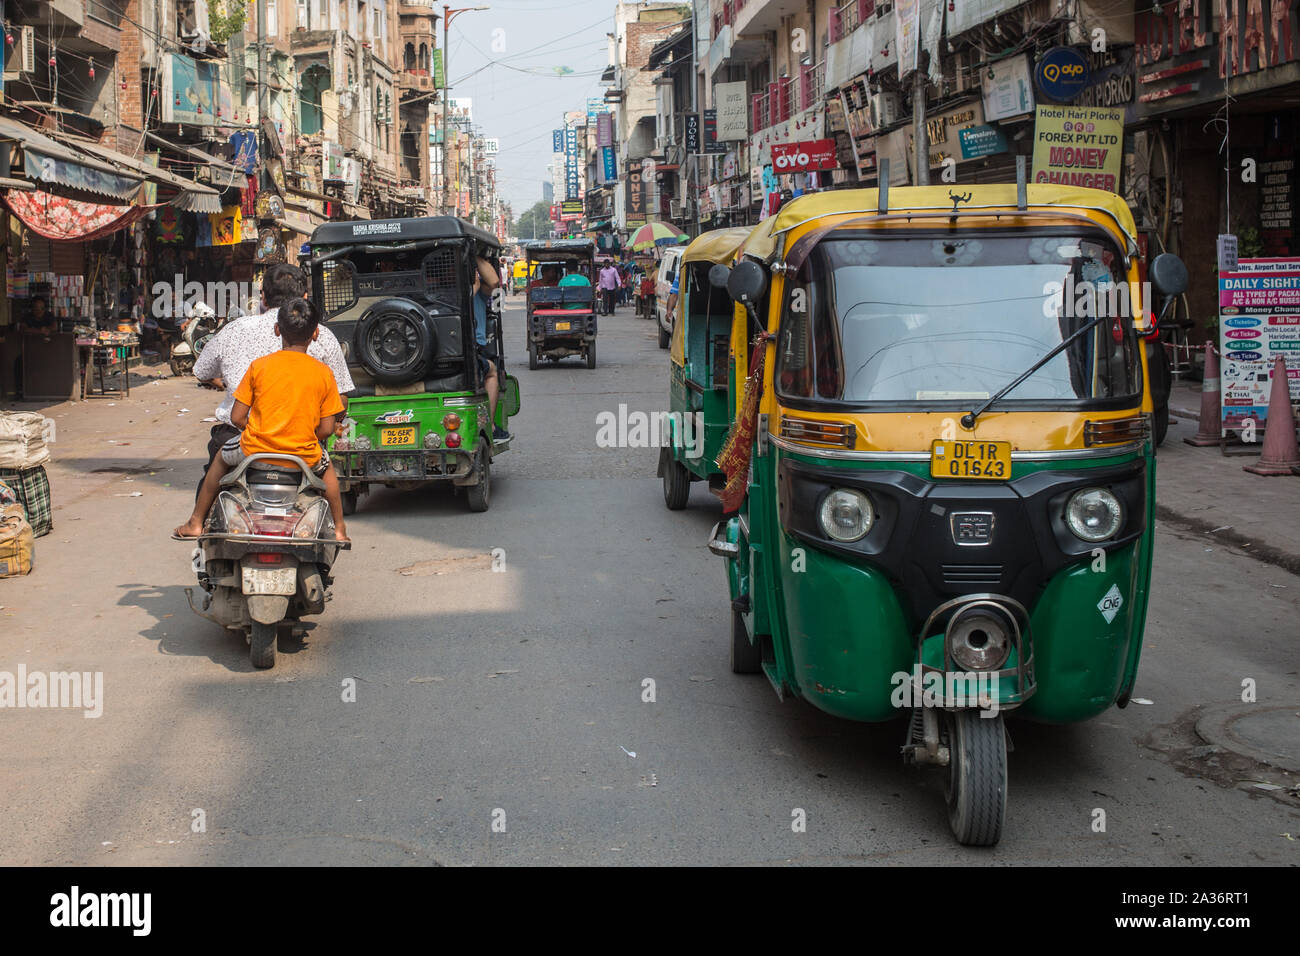 A view of rickshaws on a road in downtown New Delhi. Stock Photo